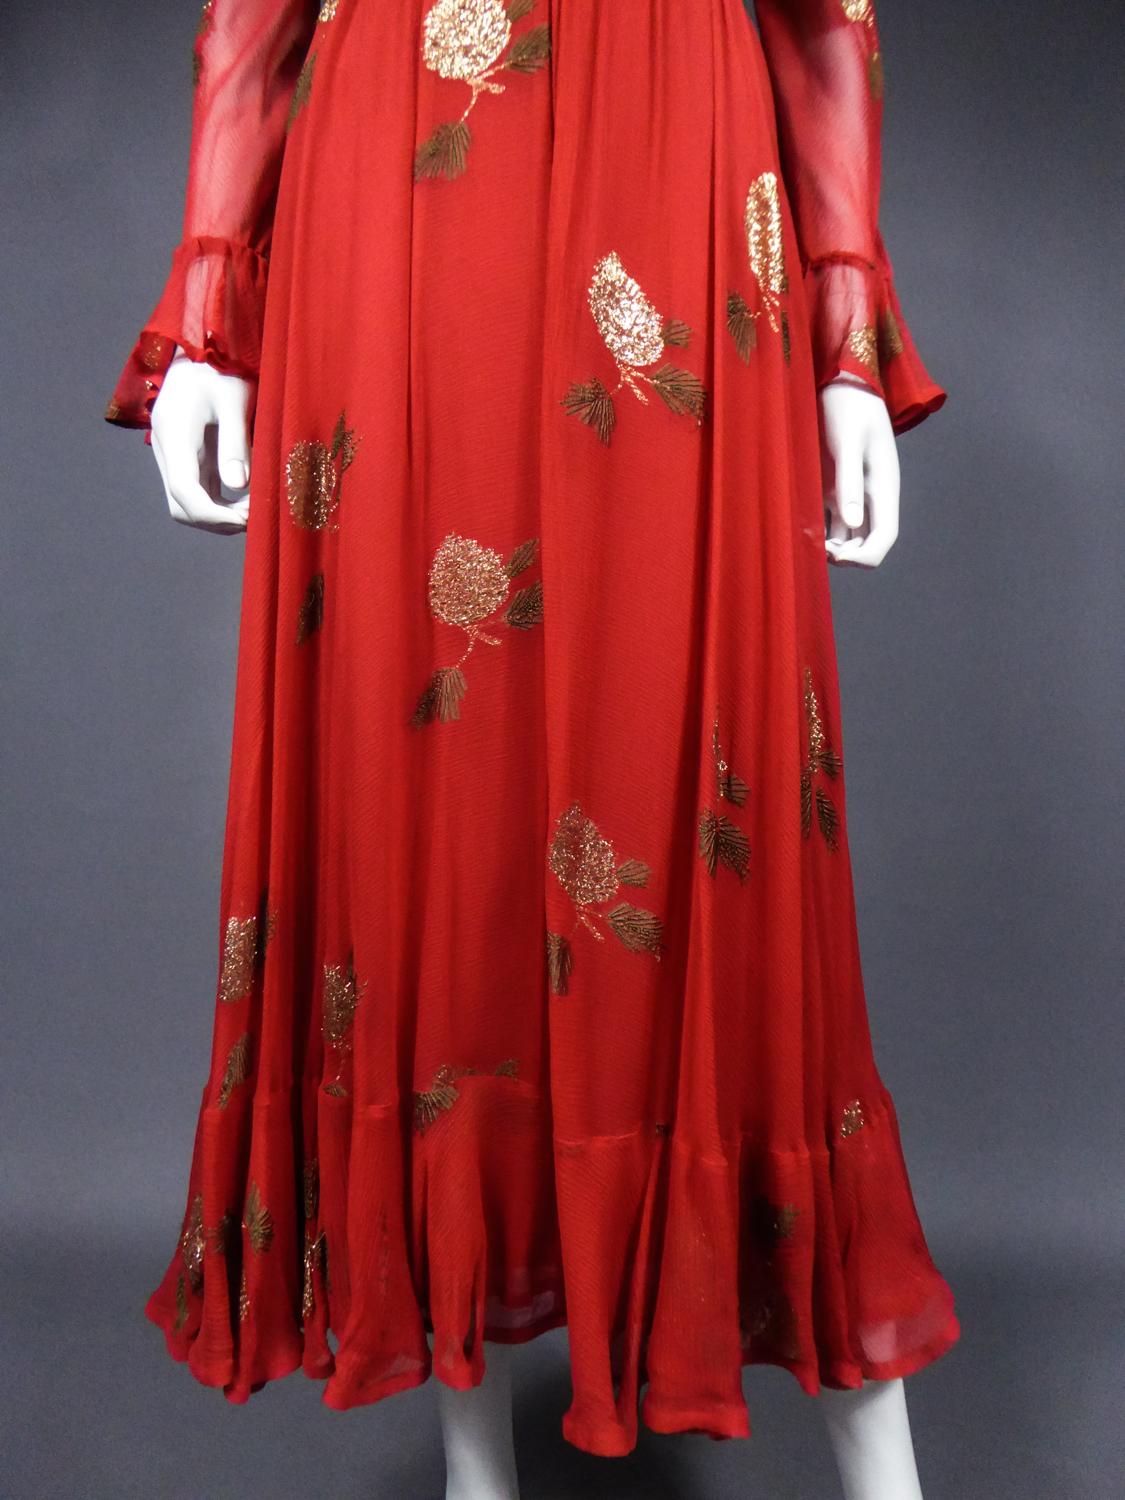 A Jean Patou French Couture Dress Numbered 98427 in Lamé Crepe Collection 1974 In Excellent Condition For Sale In Toulon, FR